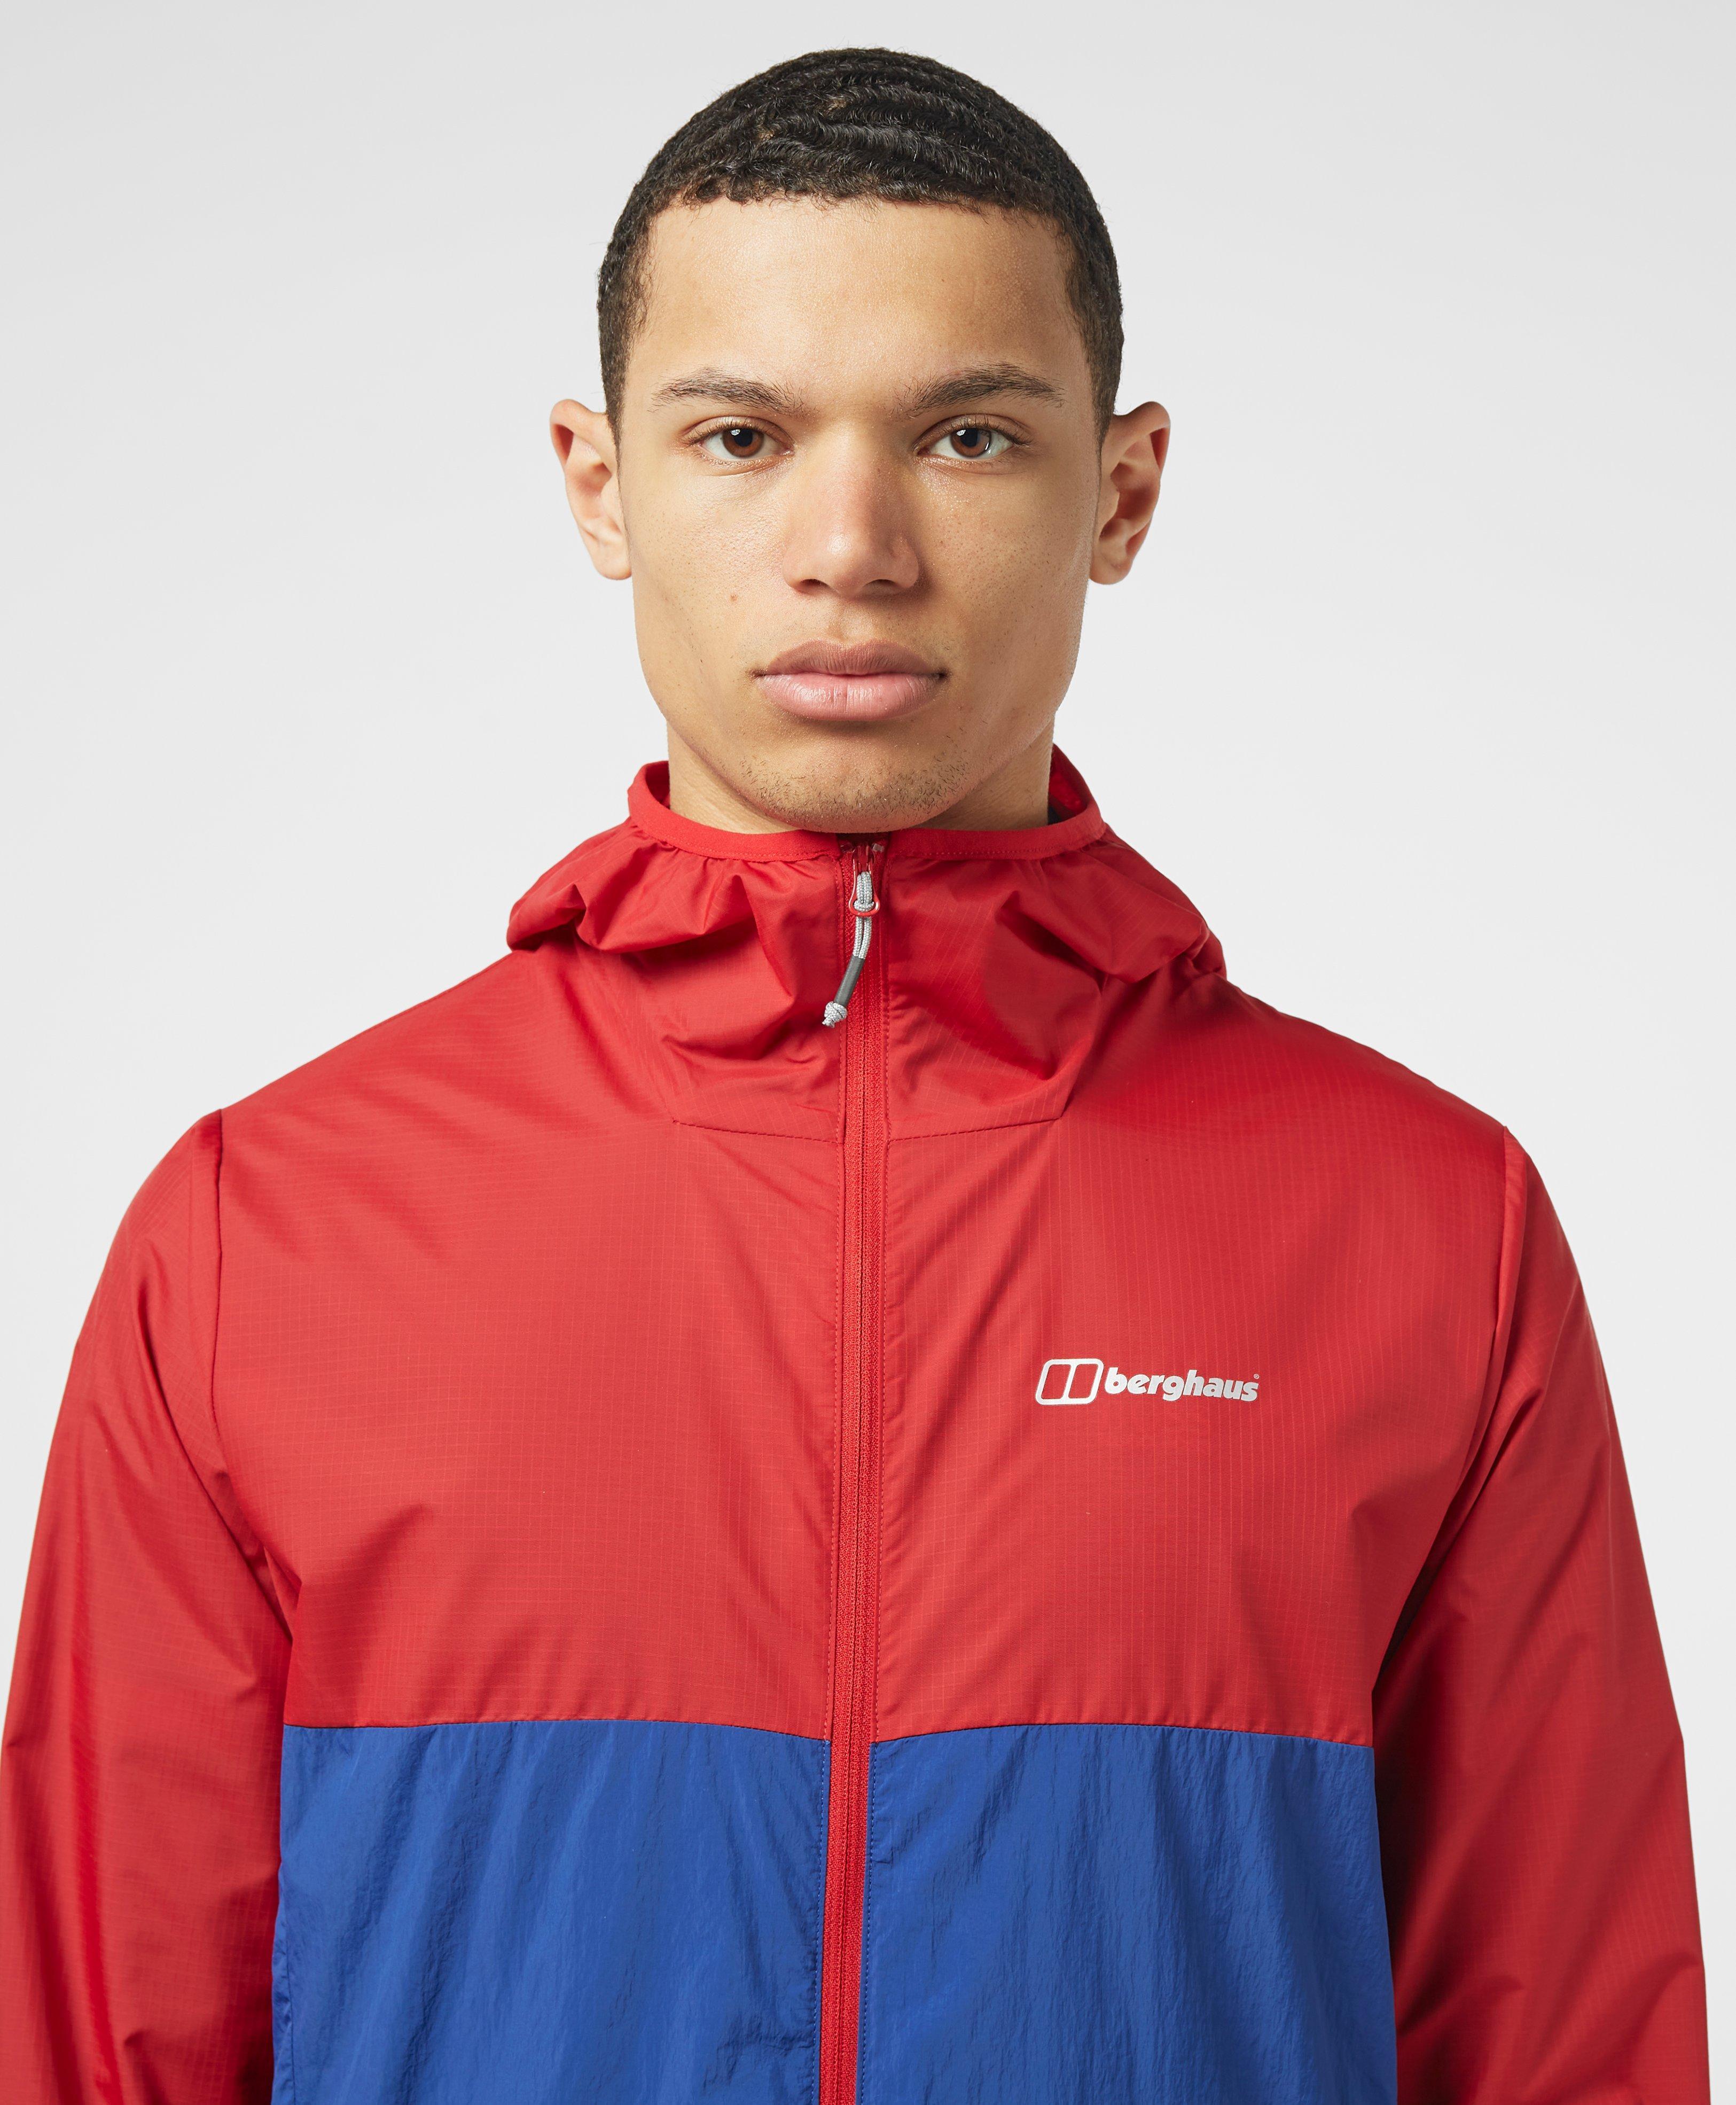 Berghaus Corbeck Lightweight Wind Jacket in Red for Men - Lyst